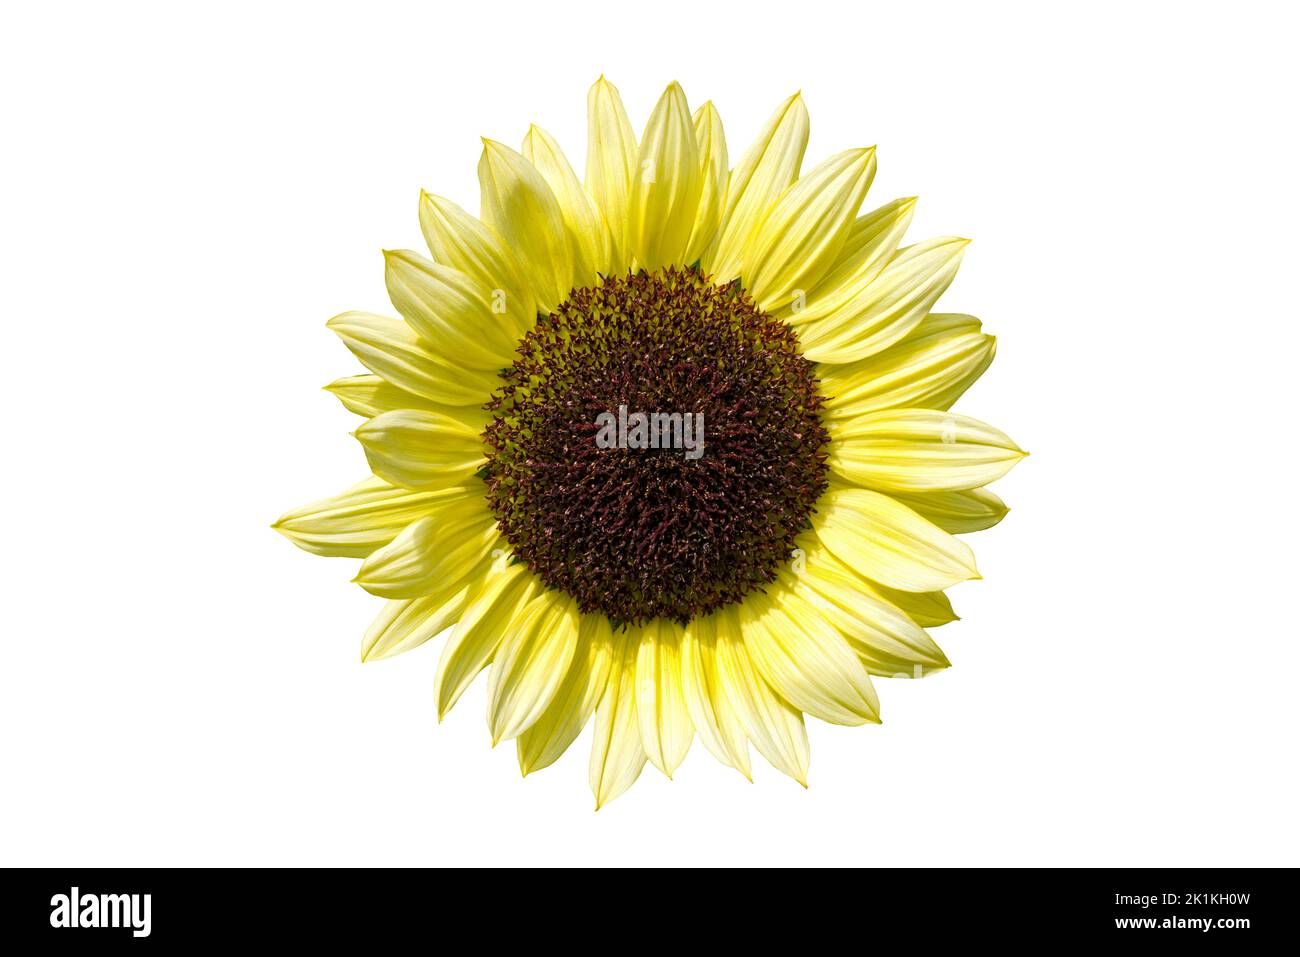 Sunflower (helianthus) a summer flowering plant with a yellow summertime flower cut out and isolated on a white background, stock photo image Stock Photo